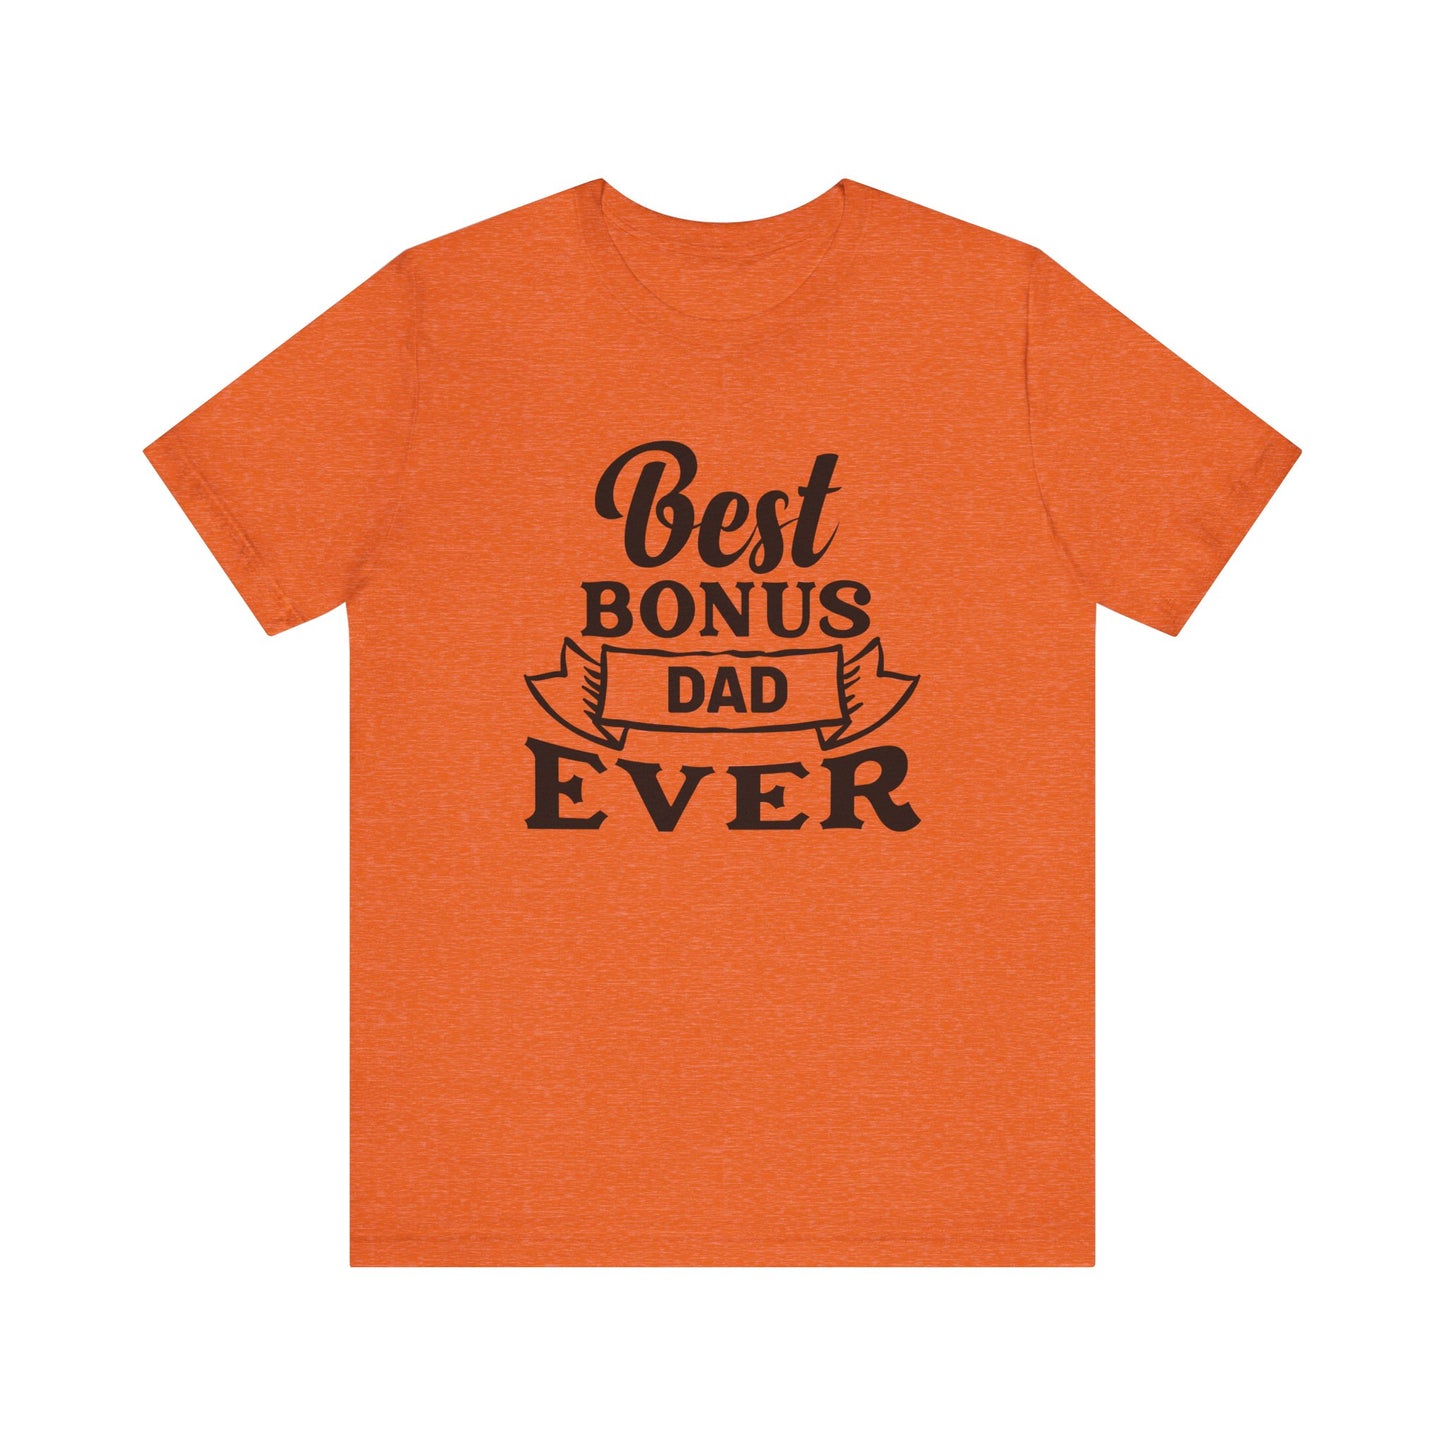 Bonus Dad T-Shirt For Father's Day Gift T Shirt For Step Dad TShirt